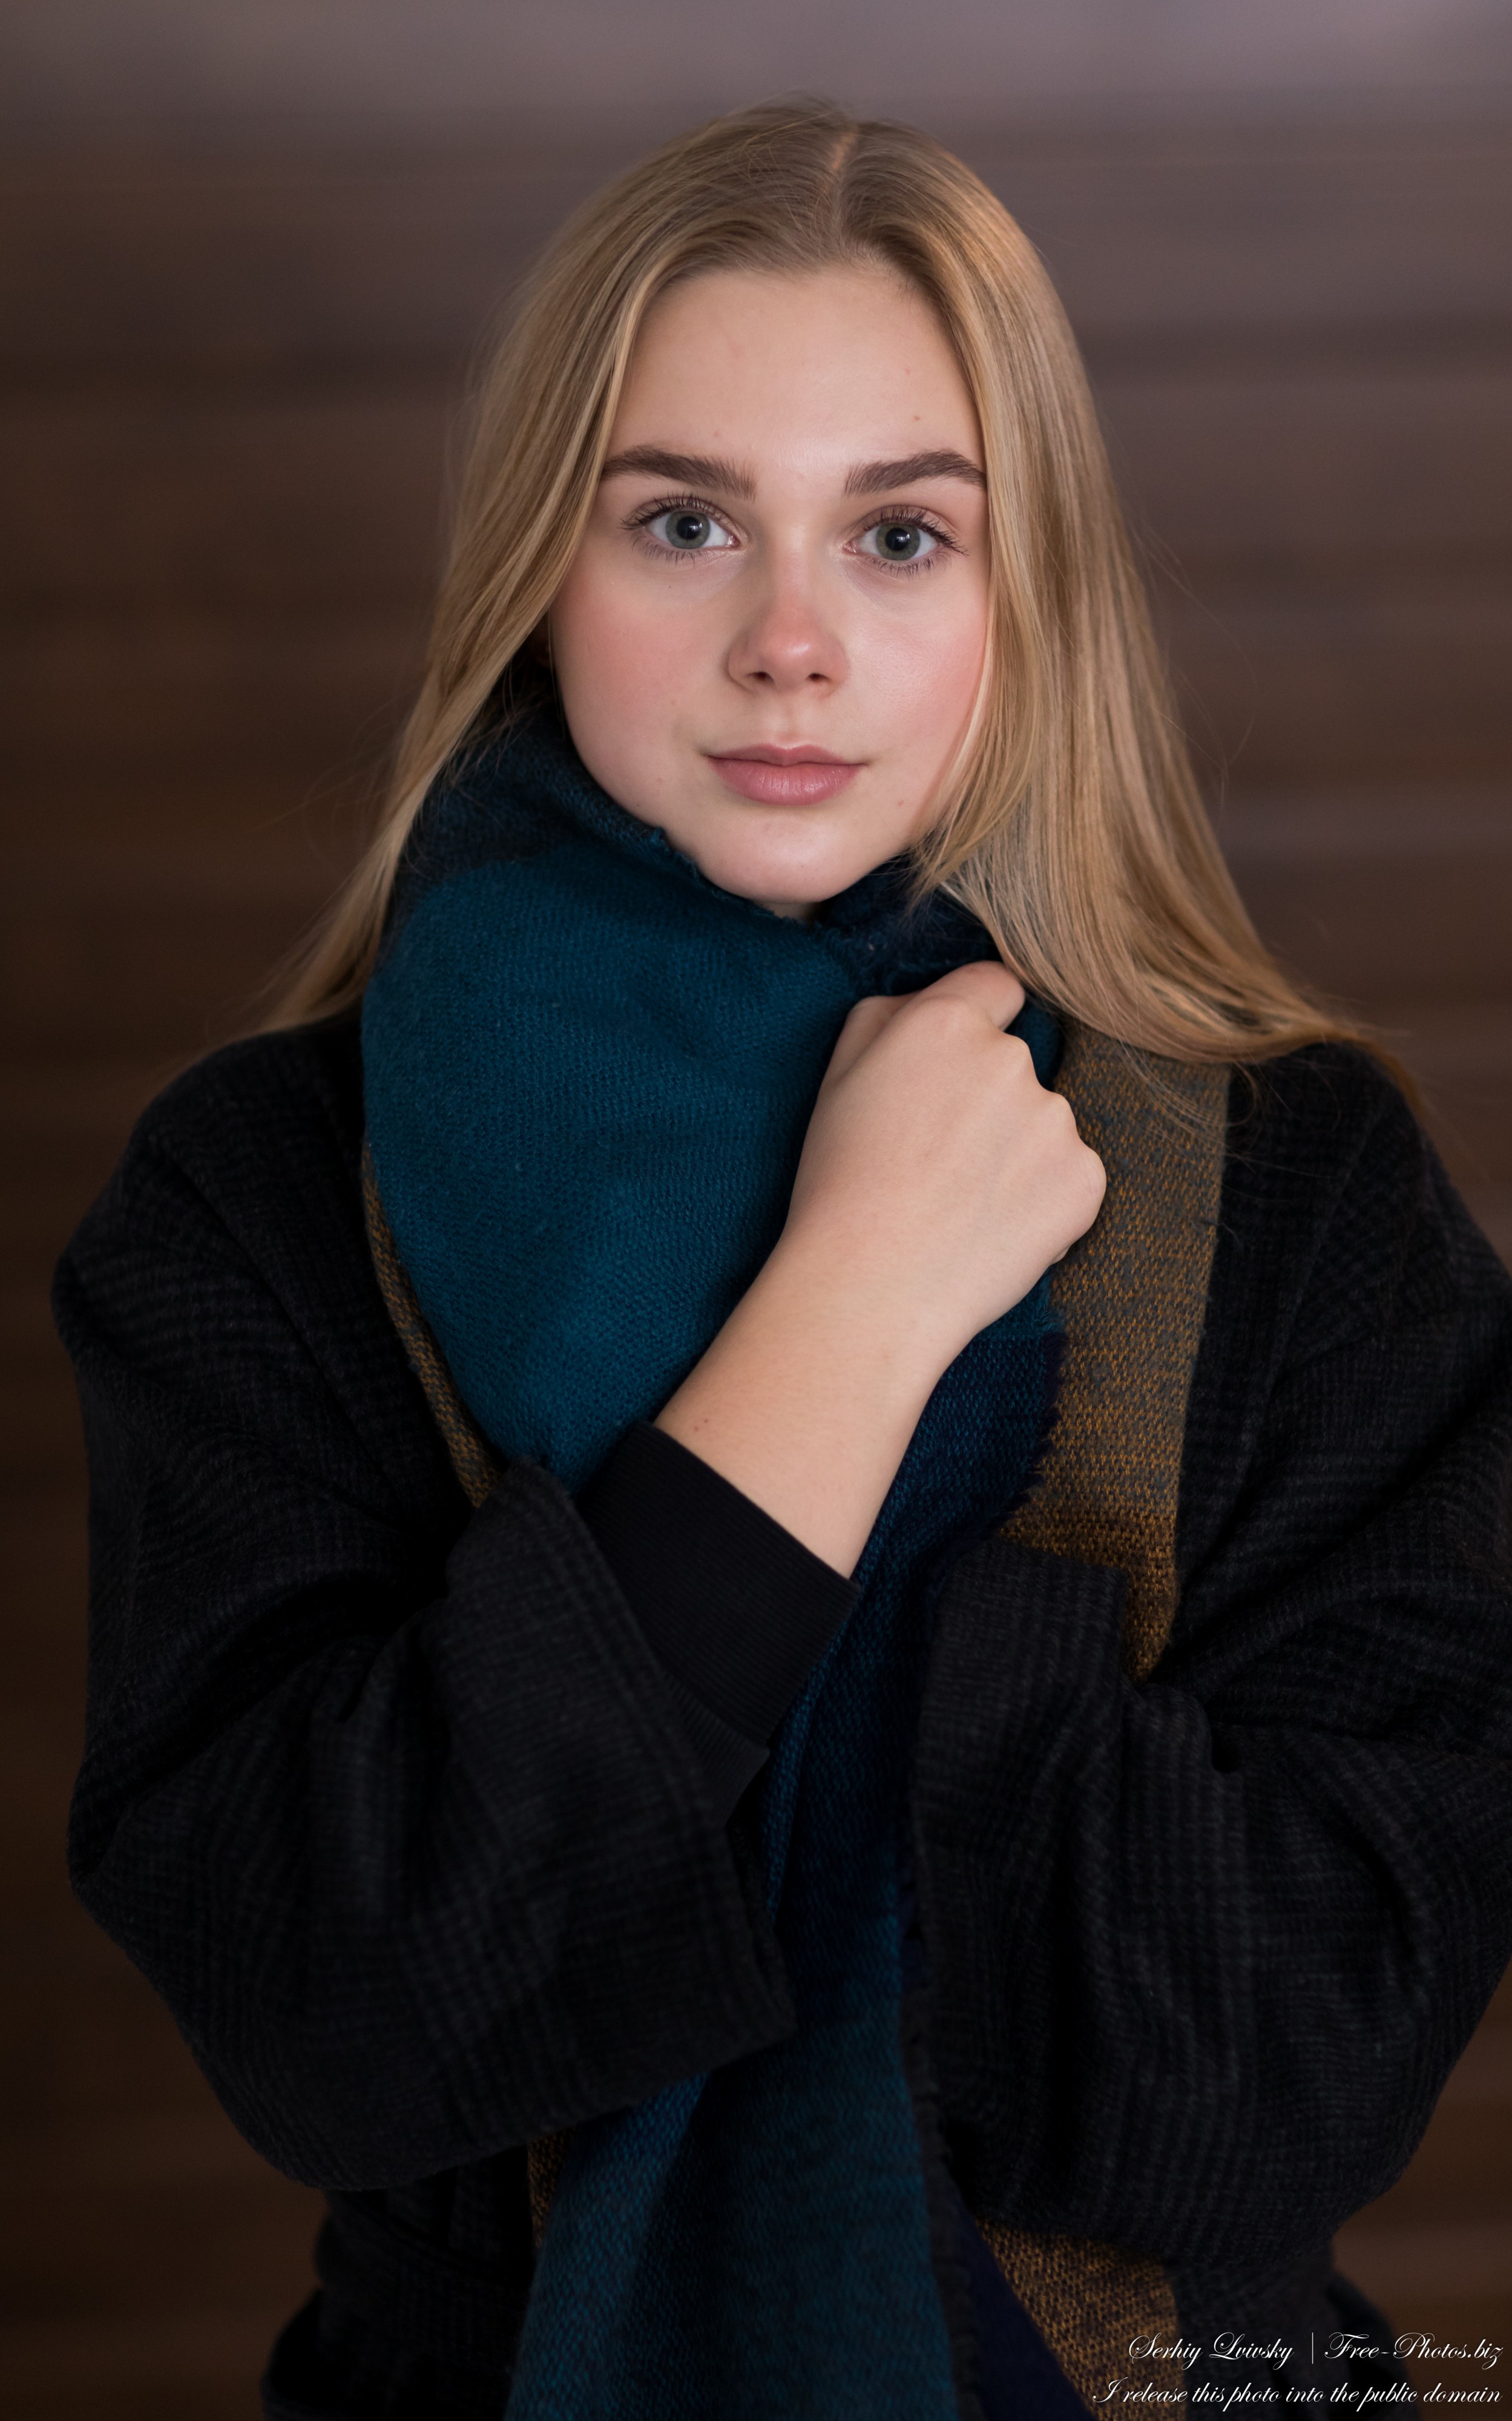 Emilia - a 15-year-old natural blonde Catholic girl photographed in November 2020 by Serhiy Lvivsky, picture 15